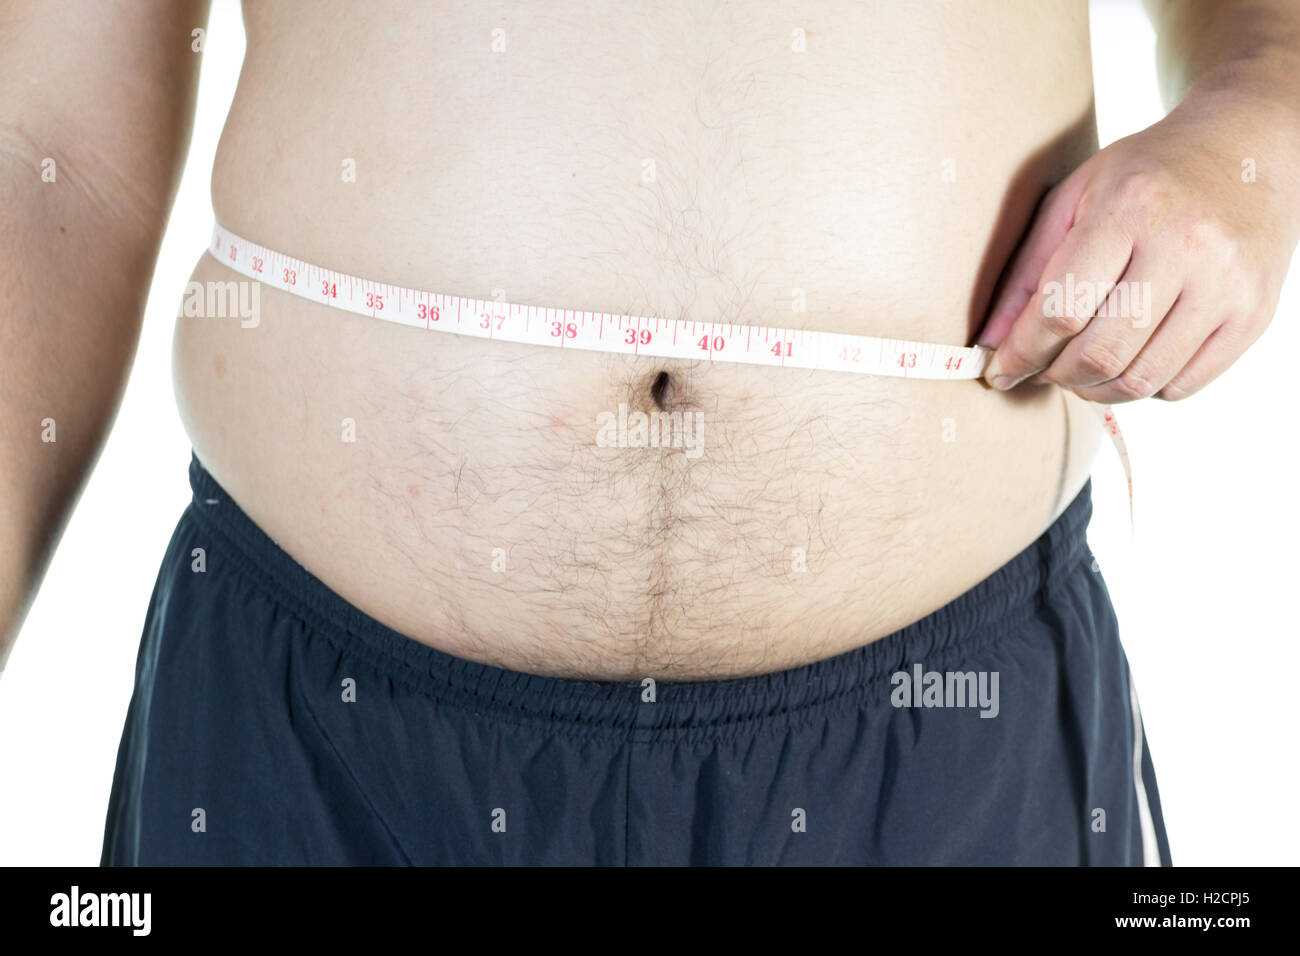 Fat man holding a measuring tape Stock Photo